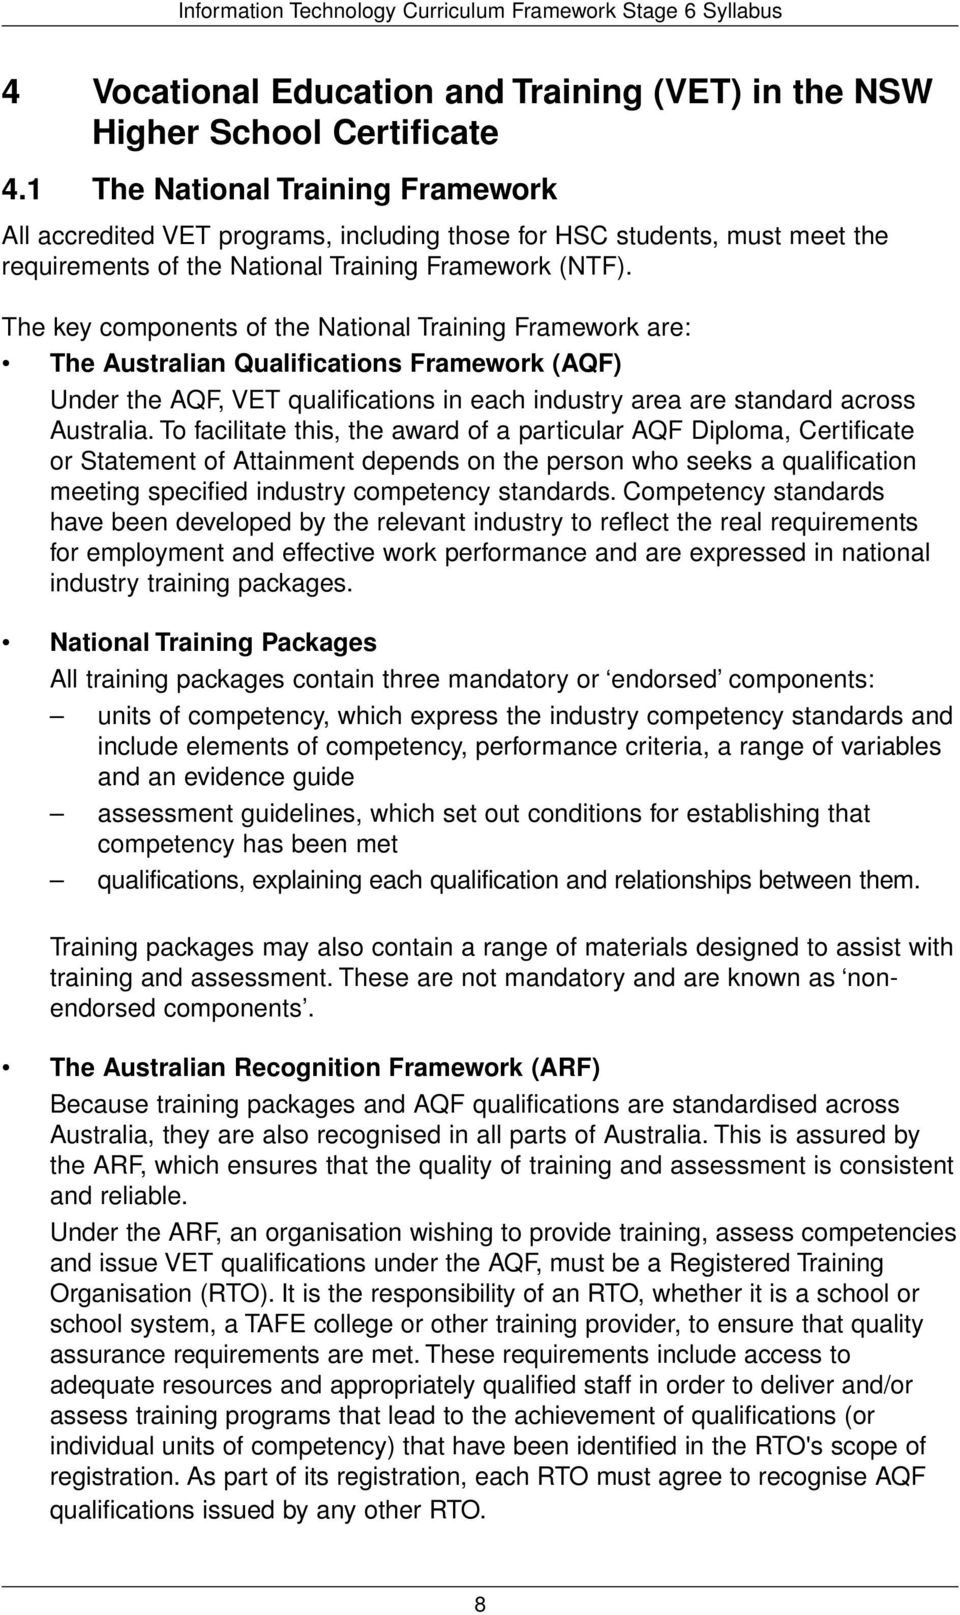 The key components of the National Training Framework are: The Australian Qualifications Framework (AQF) Under the AQF, VET qualifications in each industry area are standard across Australia.